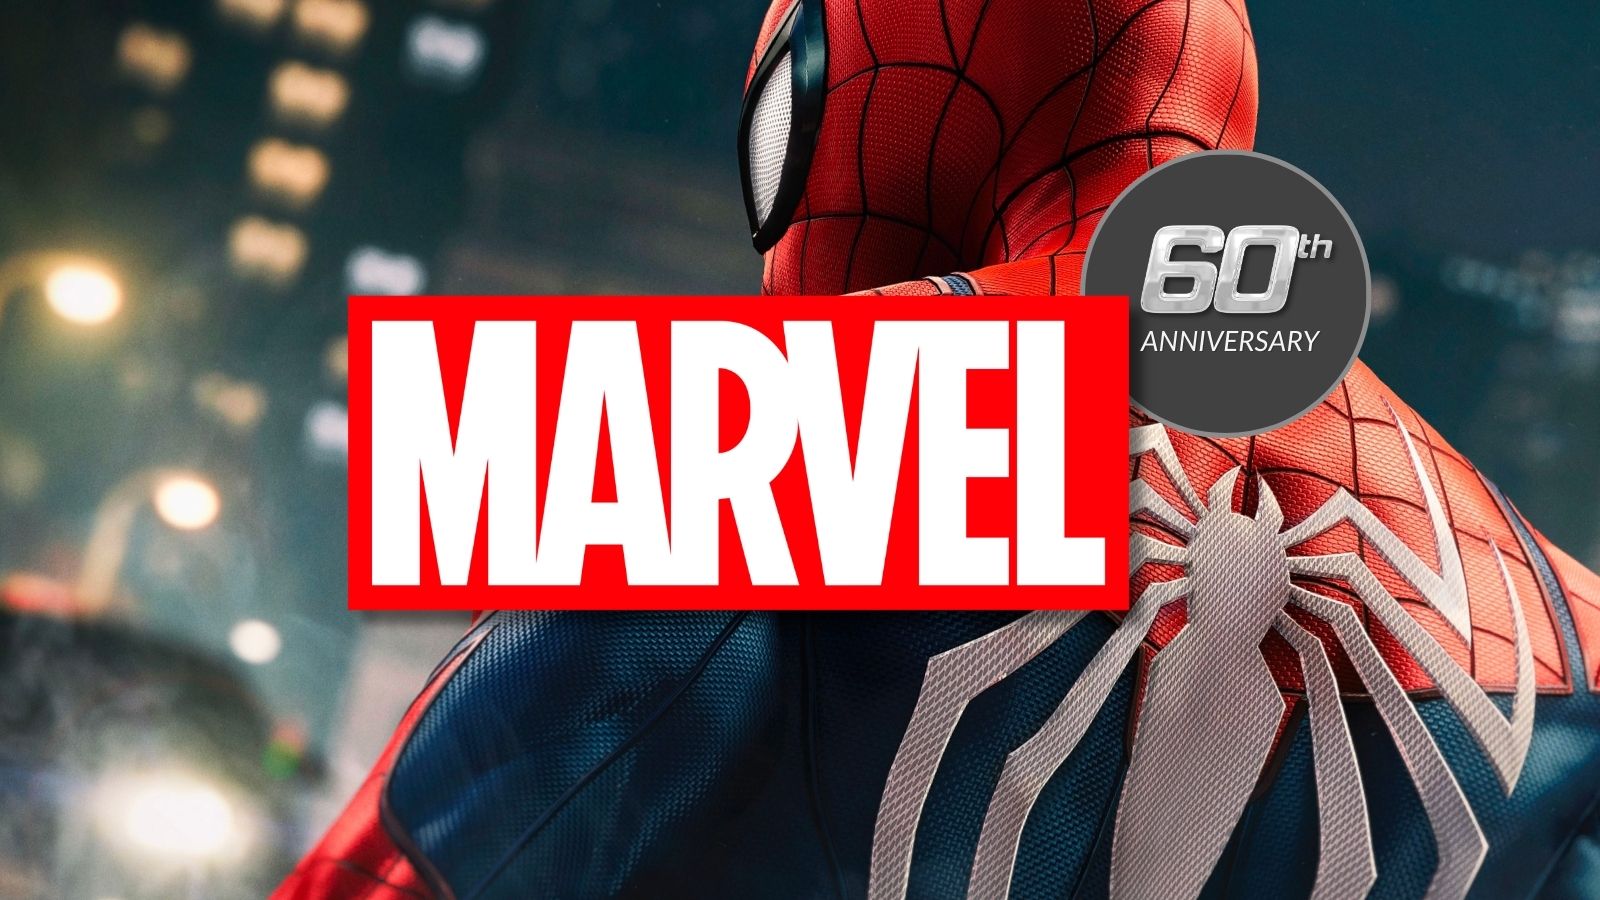 The Best Marvel Games to Play in Celebration of the 60th Anniversary(ies)